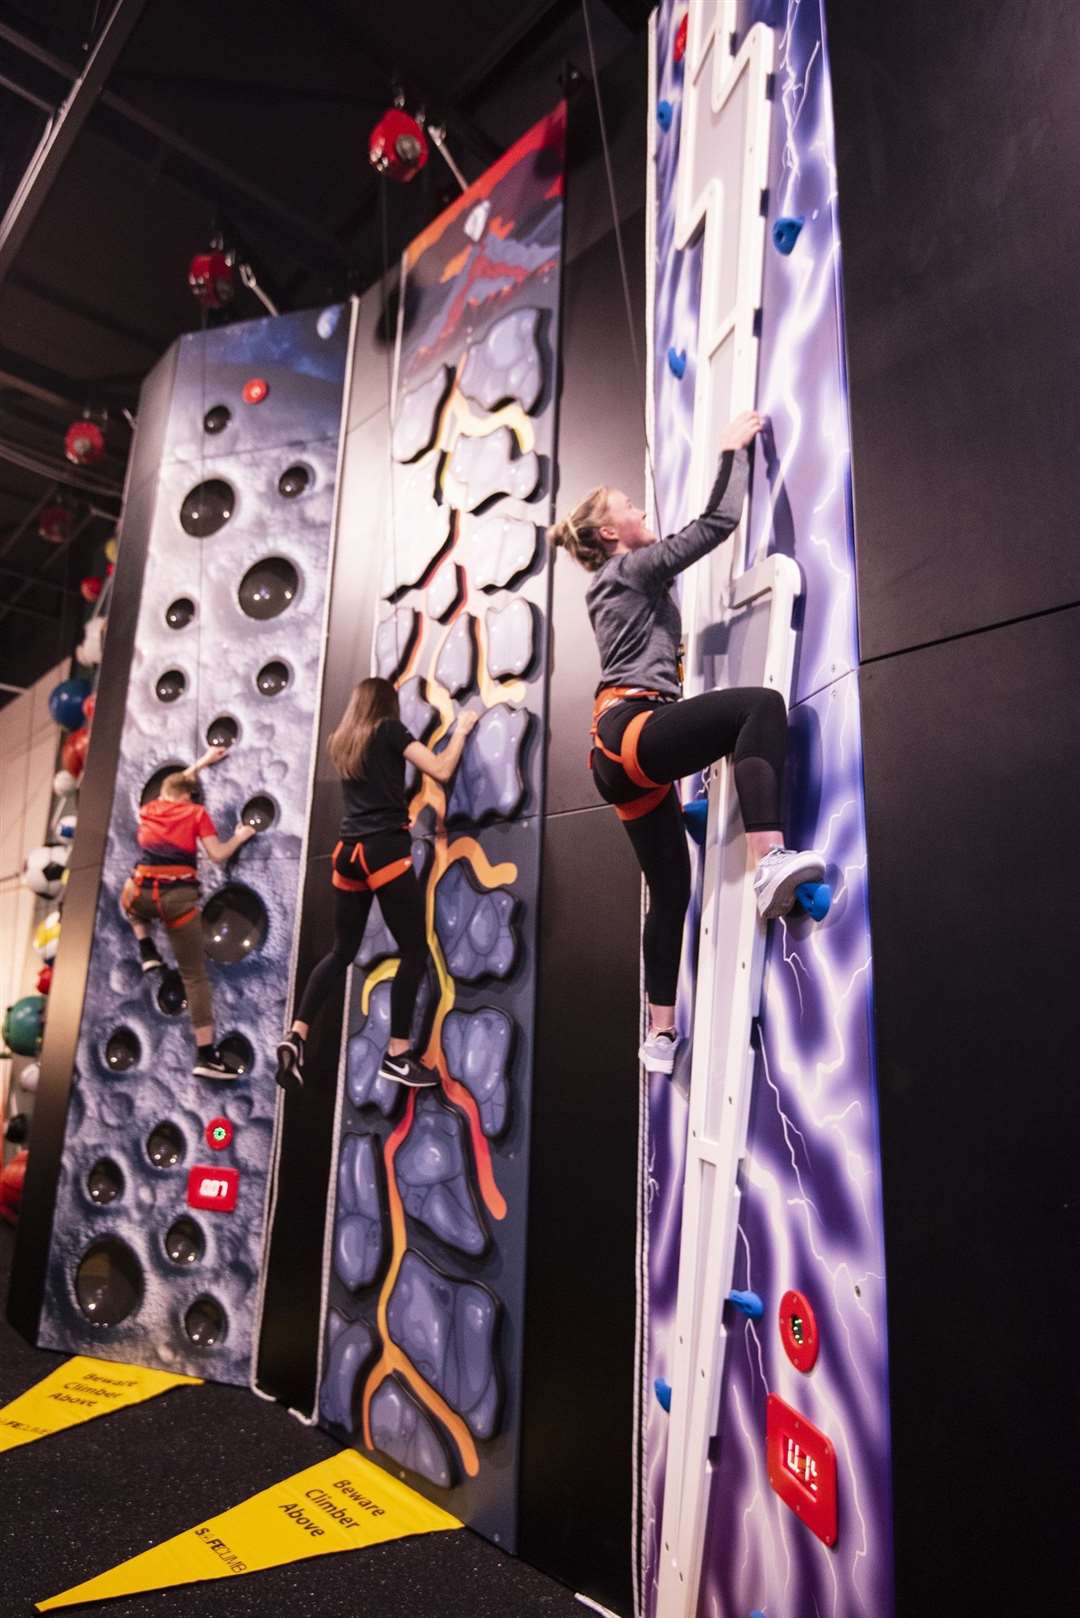 The climbing walls each feature unique challenges to scale